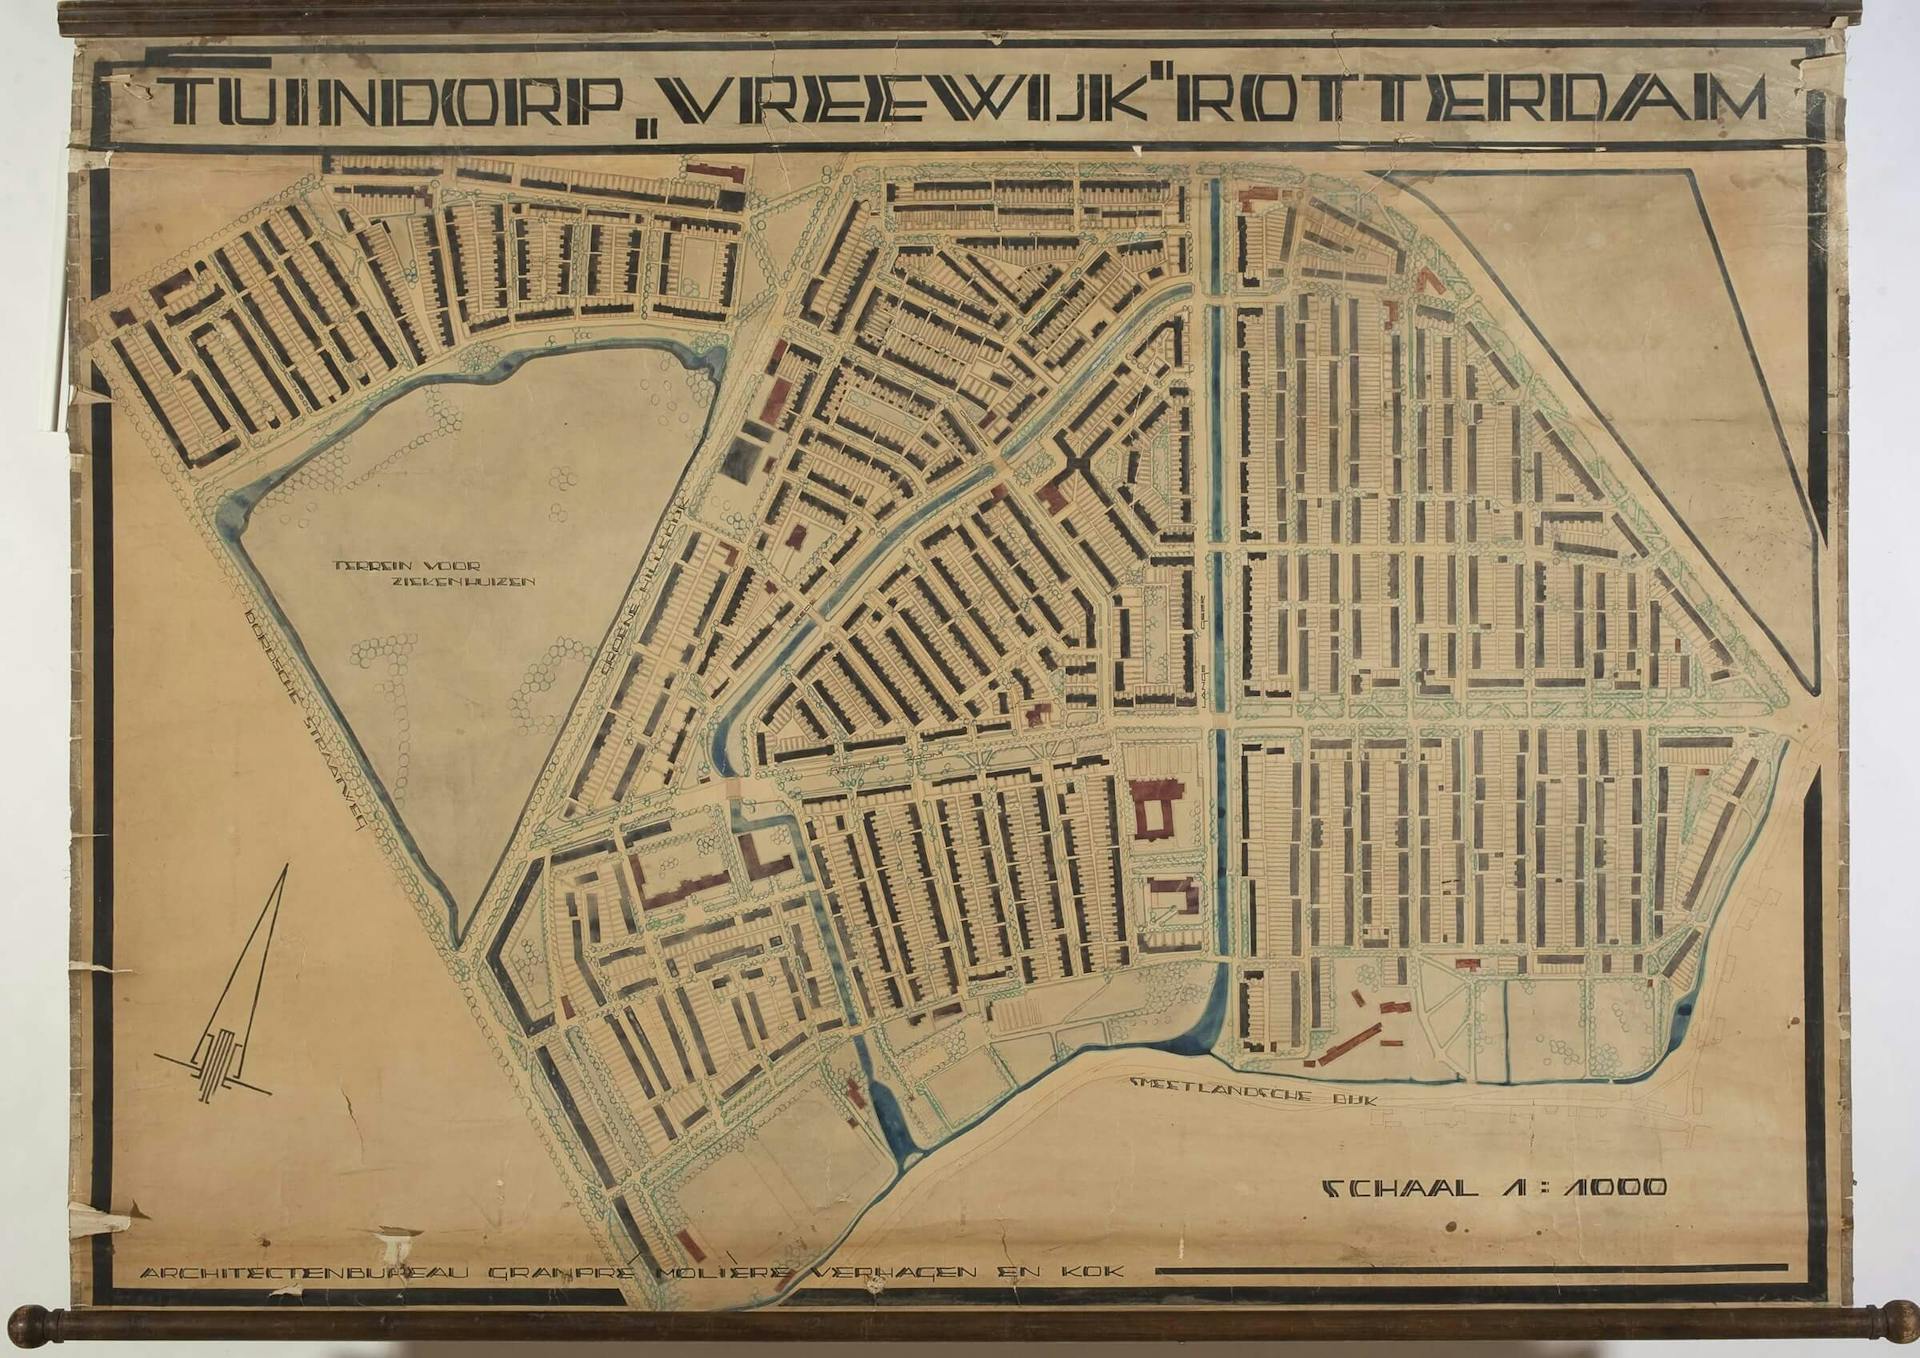 M.J. Granpre-Molière, P. Verhagen, A.J. Th. Kok, Urban plan of Vreewijk Garden Village, Rotterdam, c.1920. Although no independent green plan of Vreewijk has been preserved, this design shows how the existing polder landscape formed the la… 